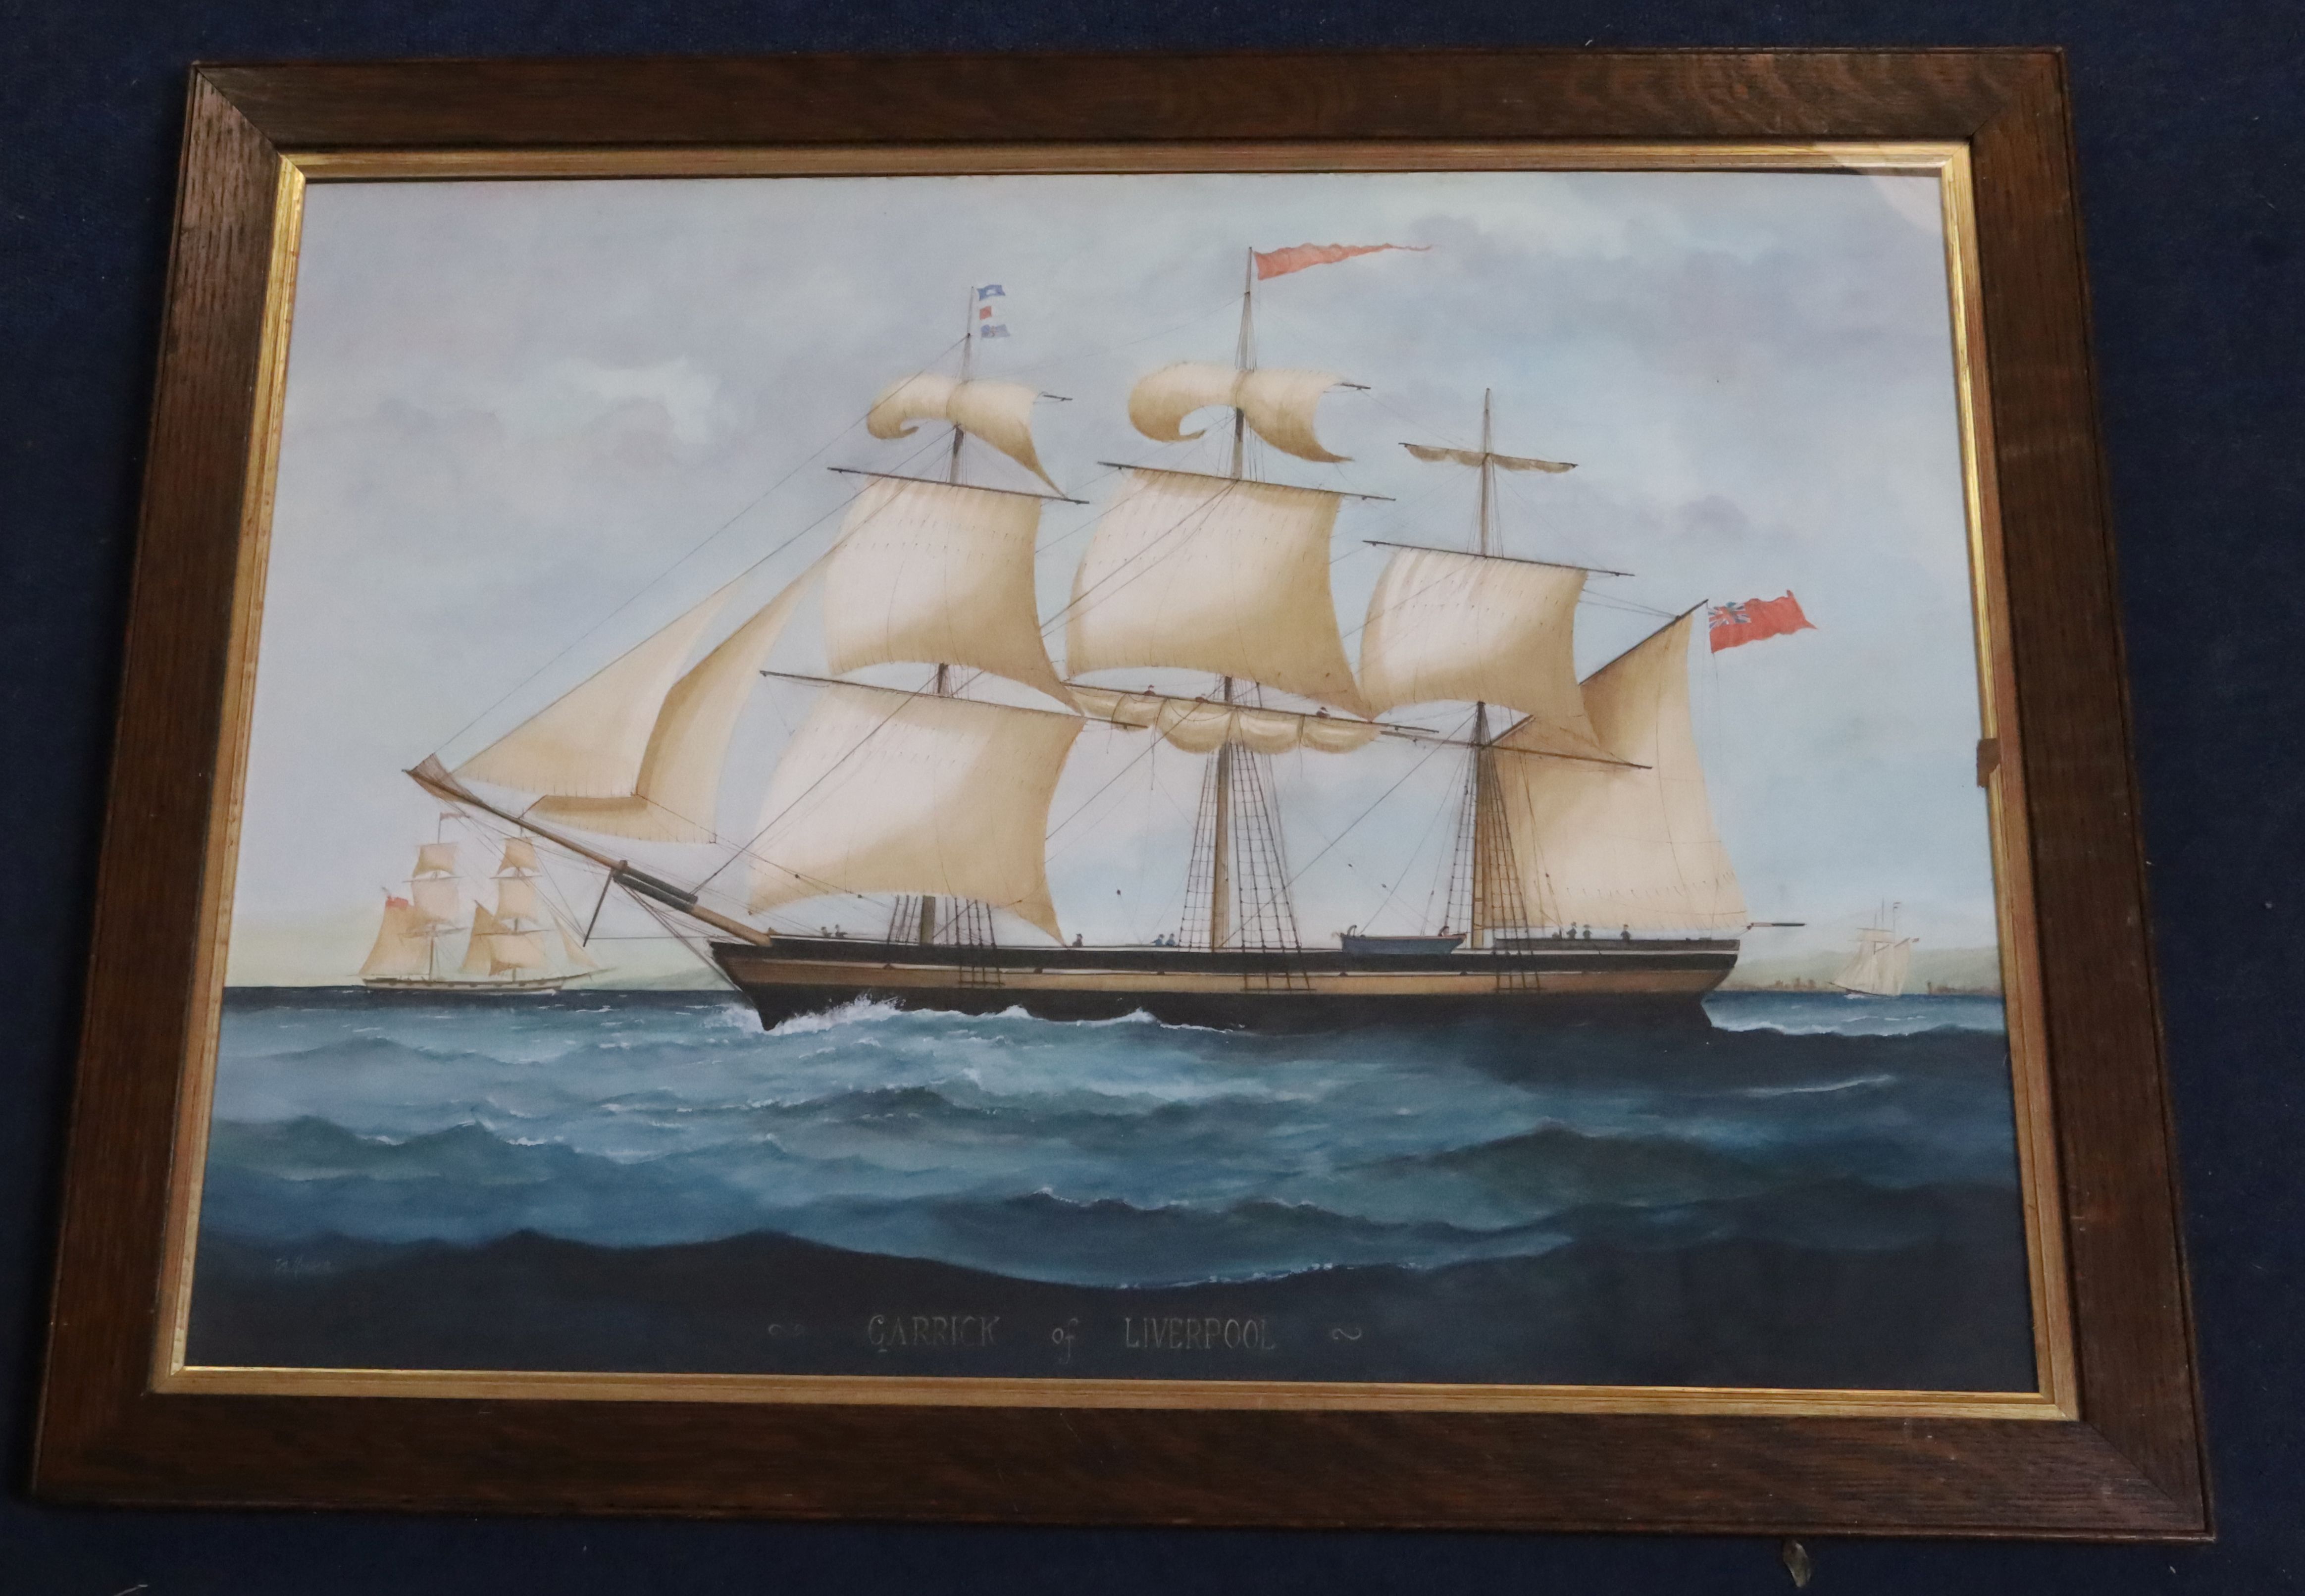 T.M. Morganwatercolour and bodycolourThe 'Garrick of Liverpool'signed20 x 27.75in. - Image 2 of 2